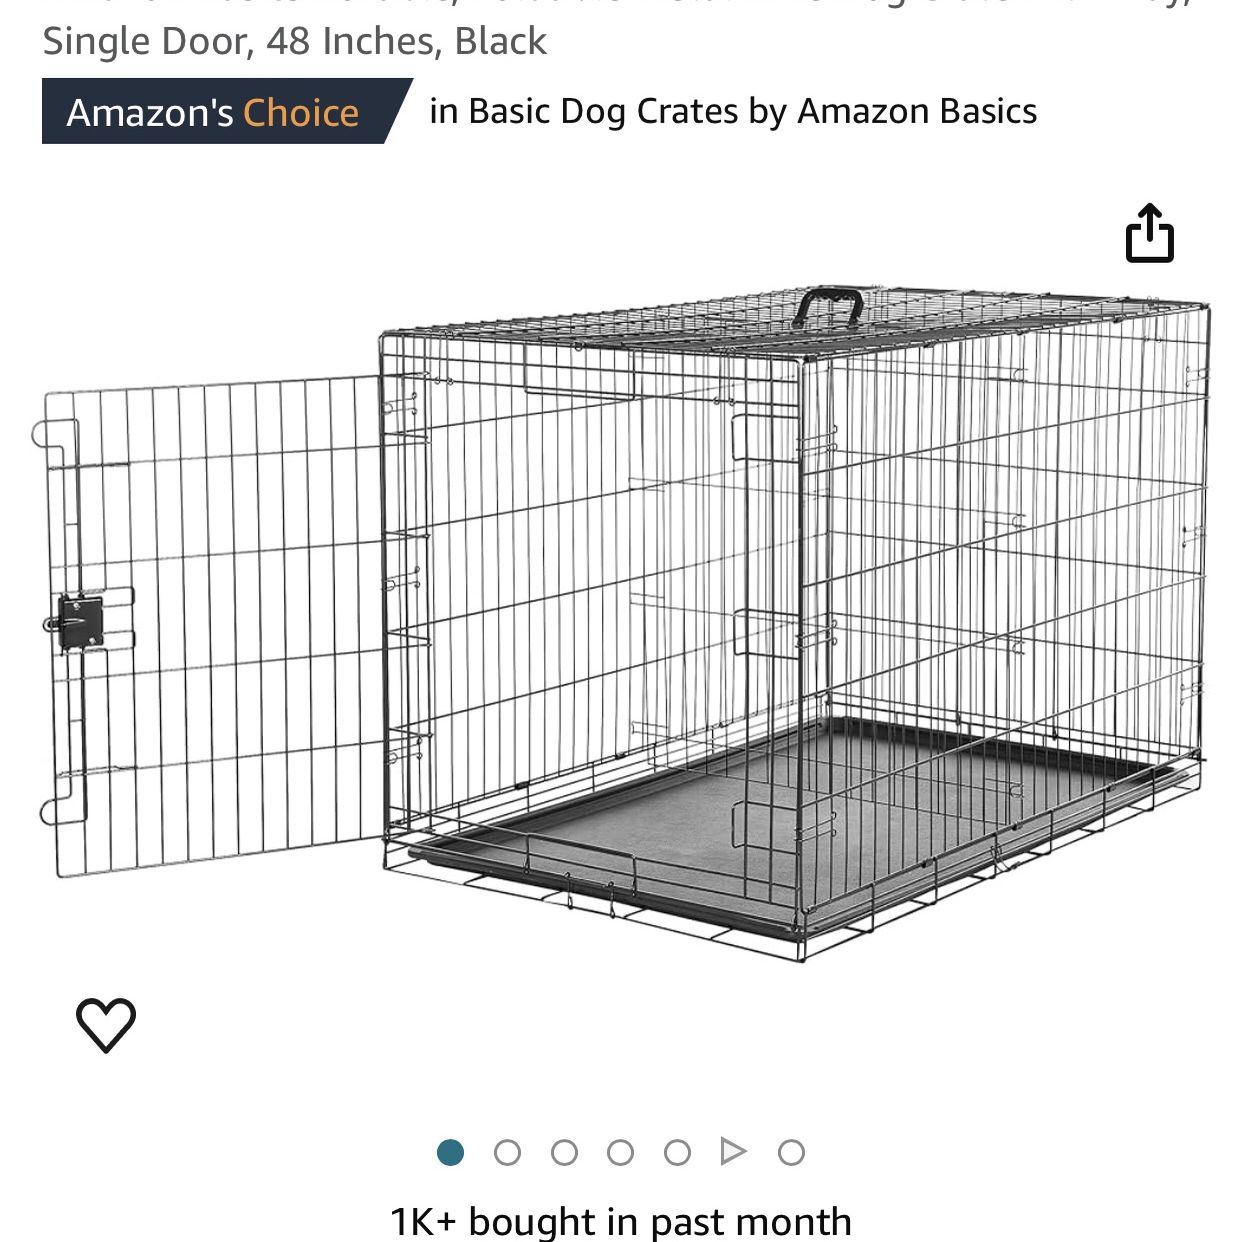 Amazon Basics Durable, Foldable Metal Wire Dog Crate with Tray, Single Door, 48 Inches, Black